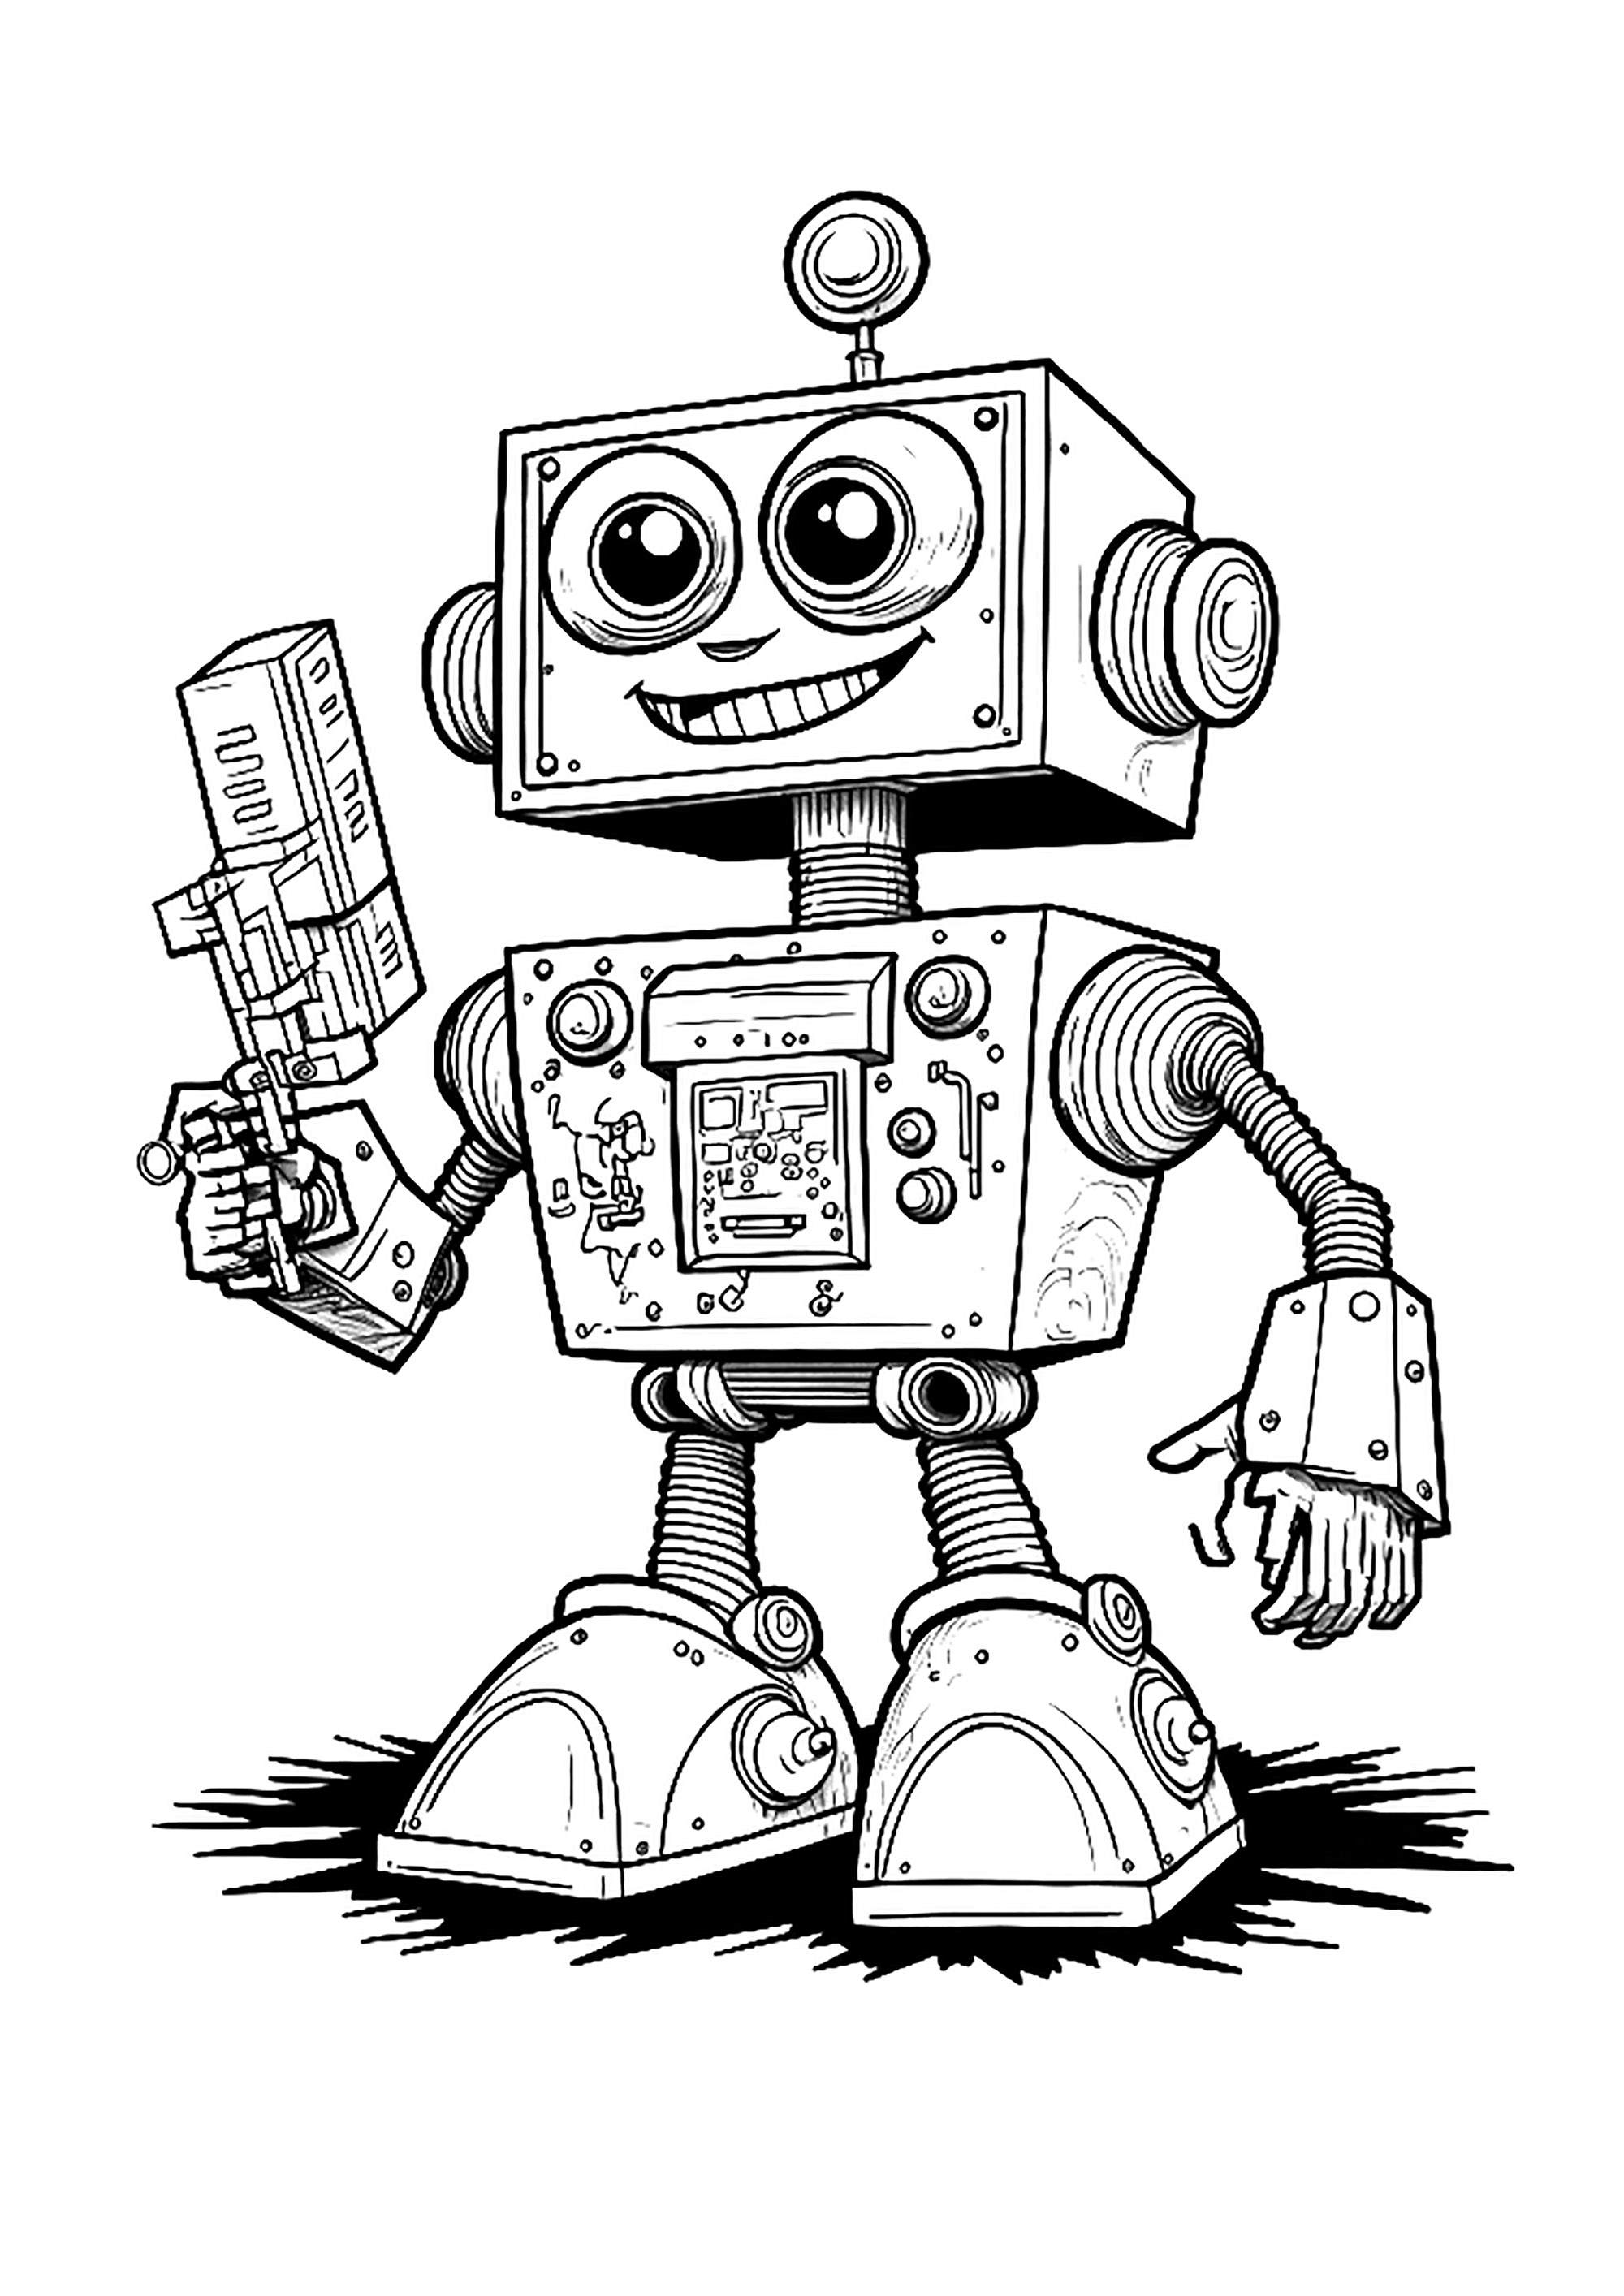 Nice robot in the style of the 80's